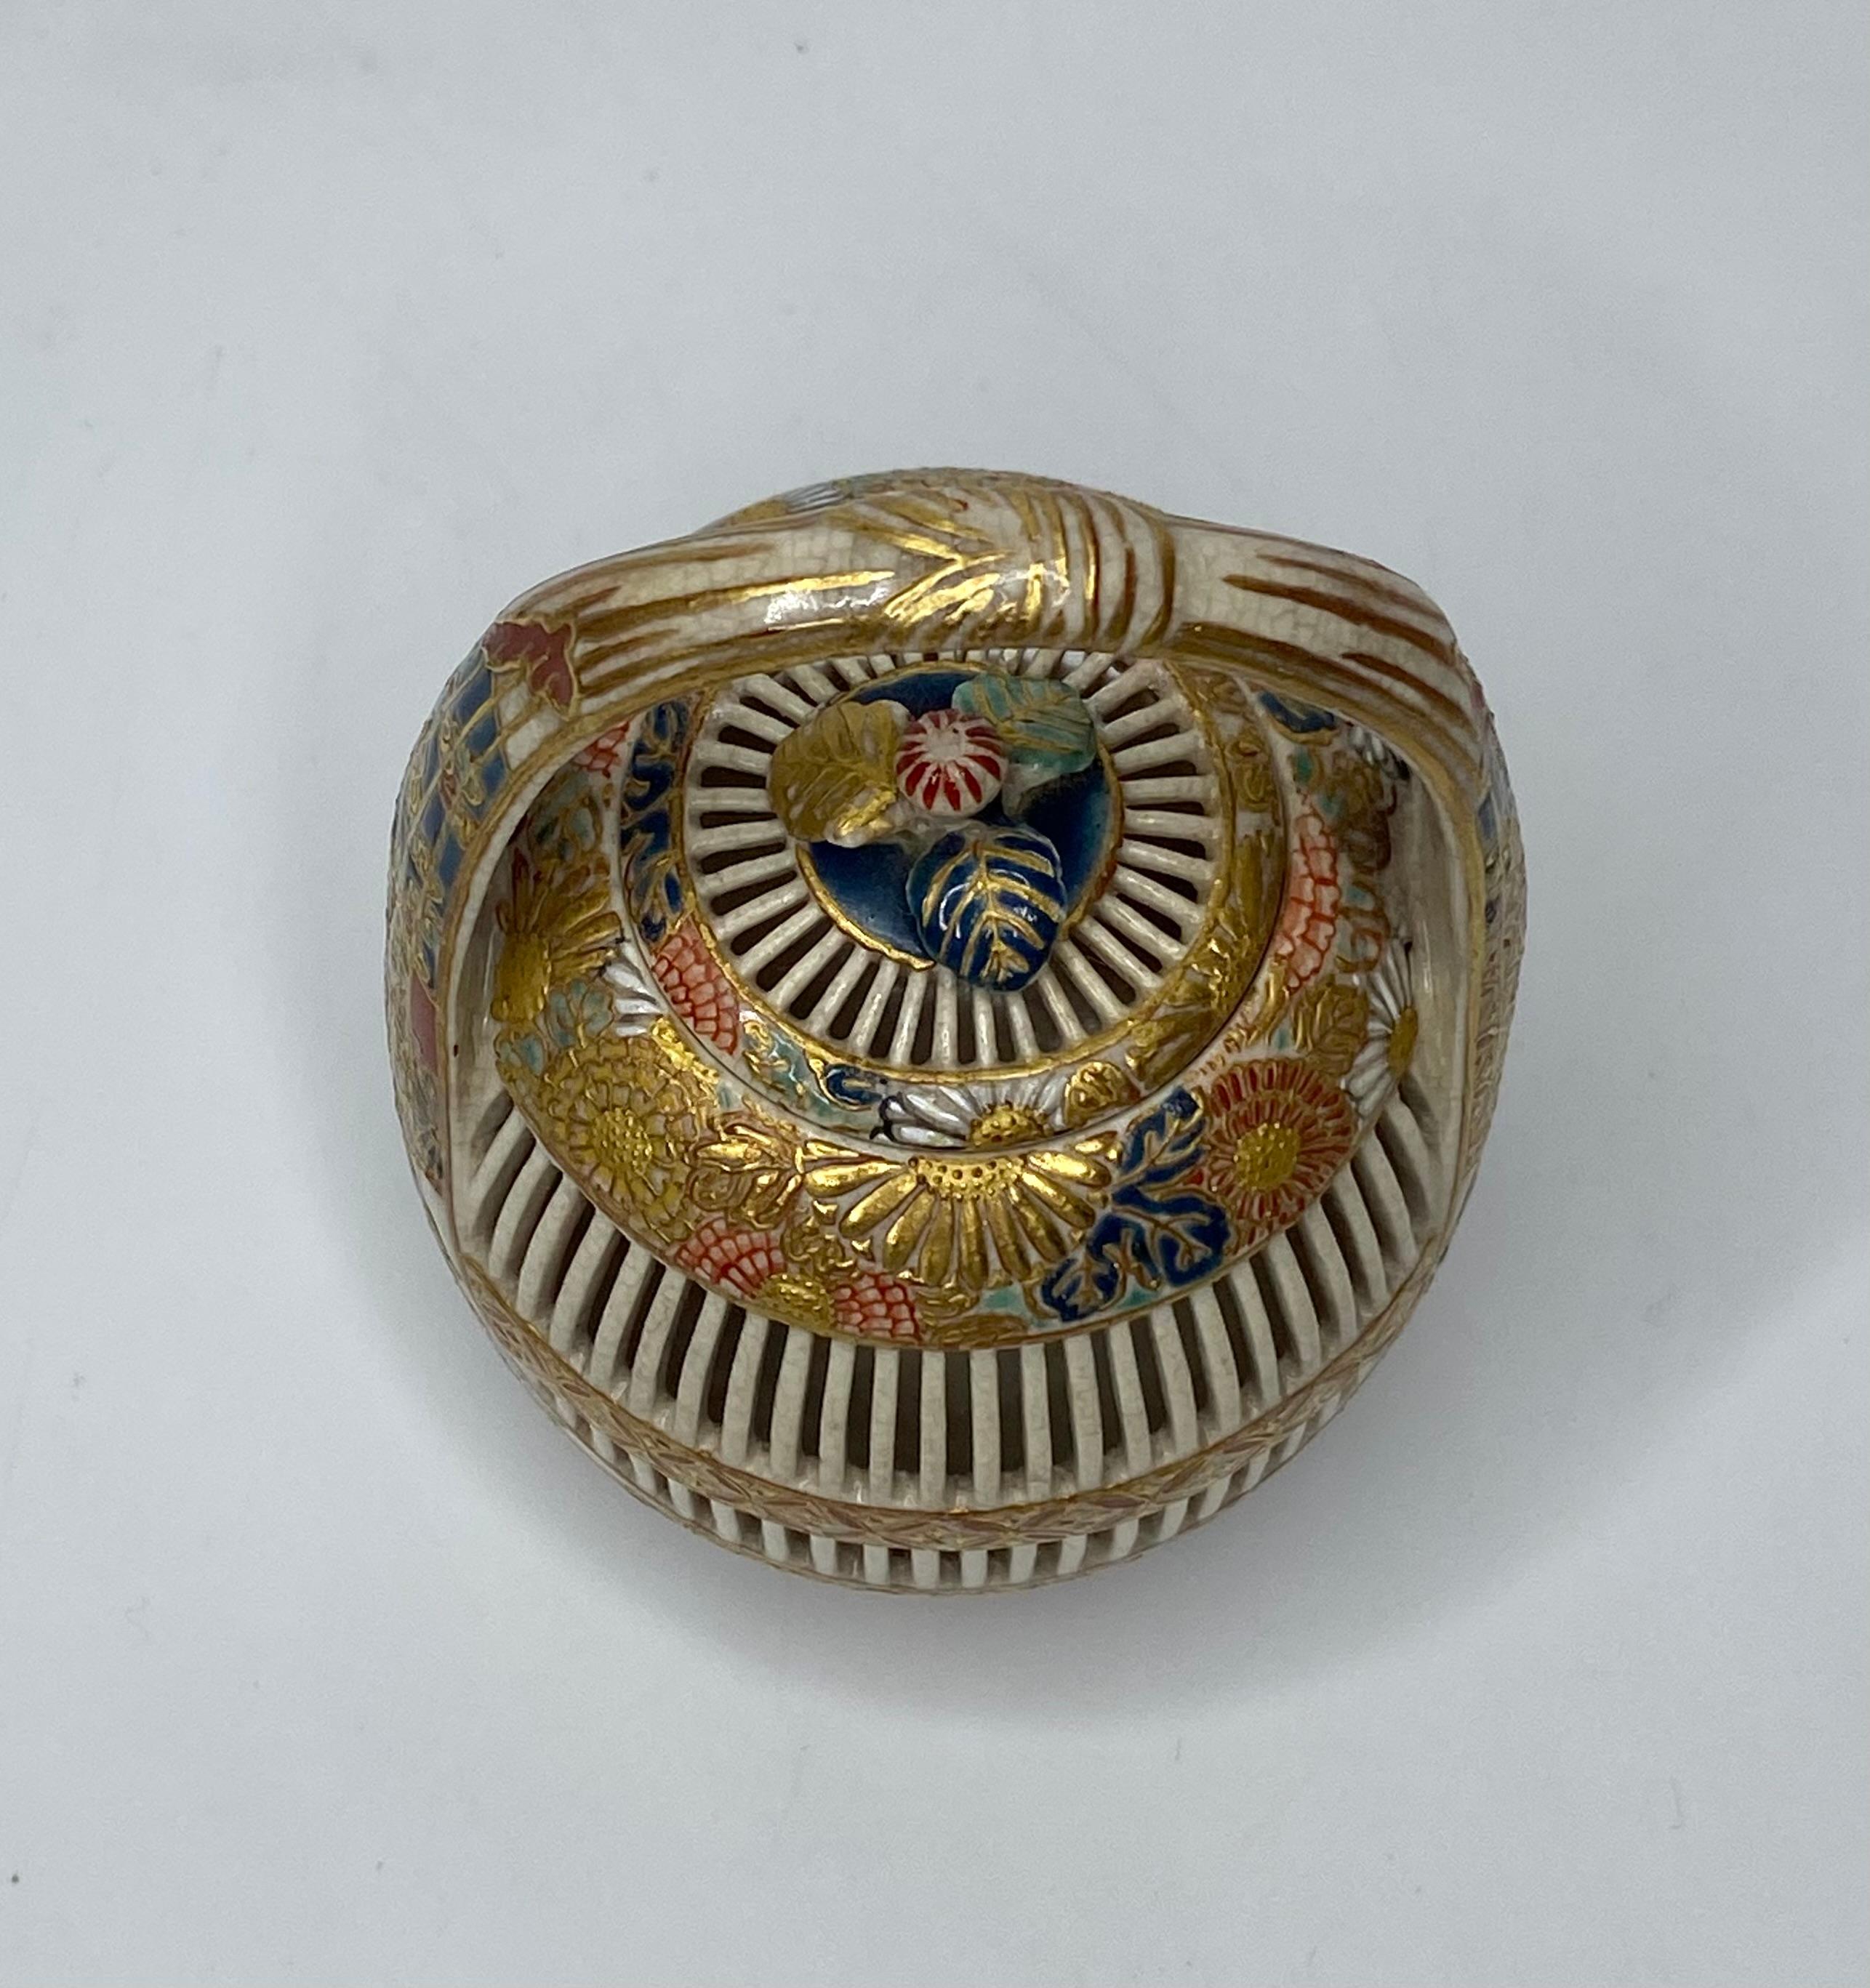 Fired Imperial Satsuma cricket cage, Japan, c. 1880, Meiji Period.